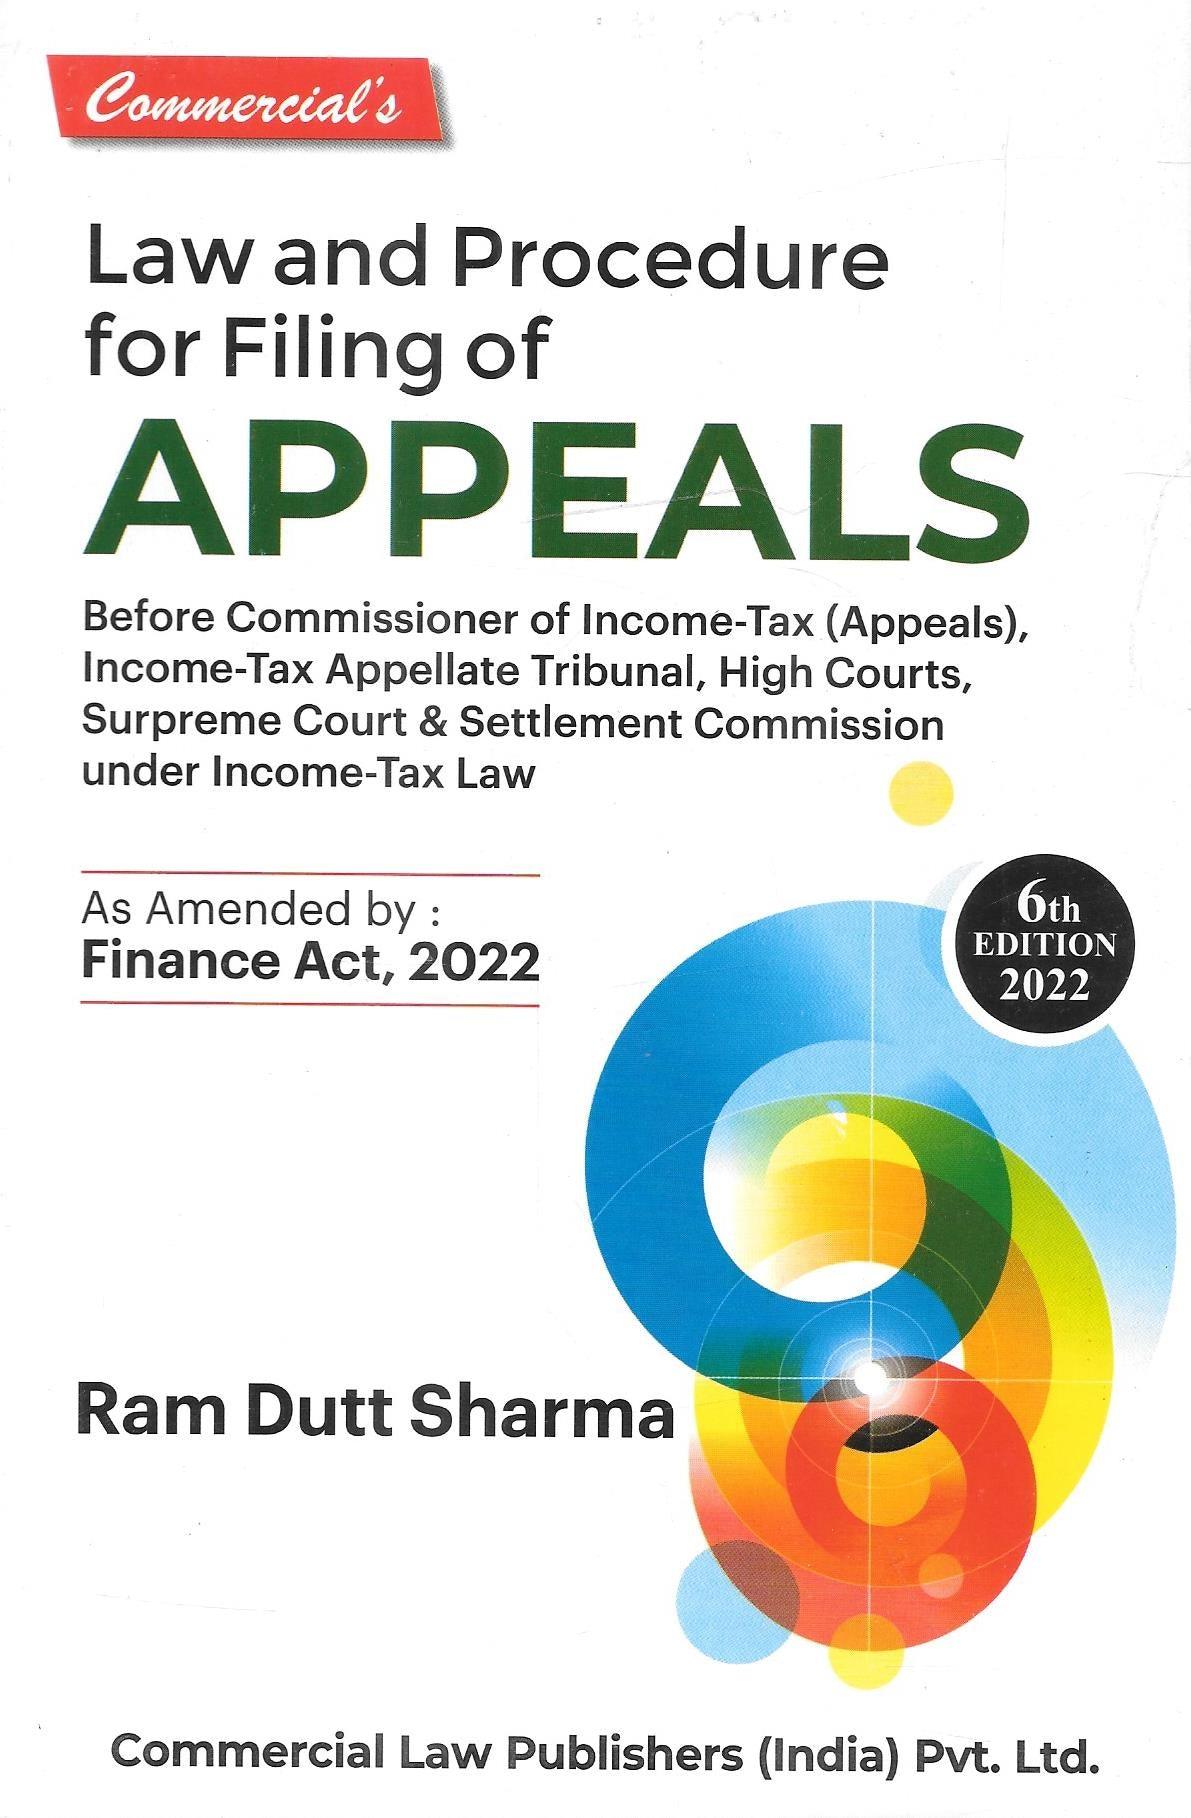 Law and procedure of Filing of Appeals